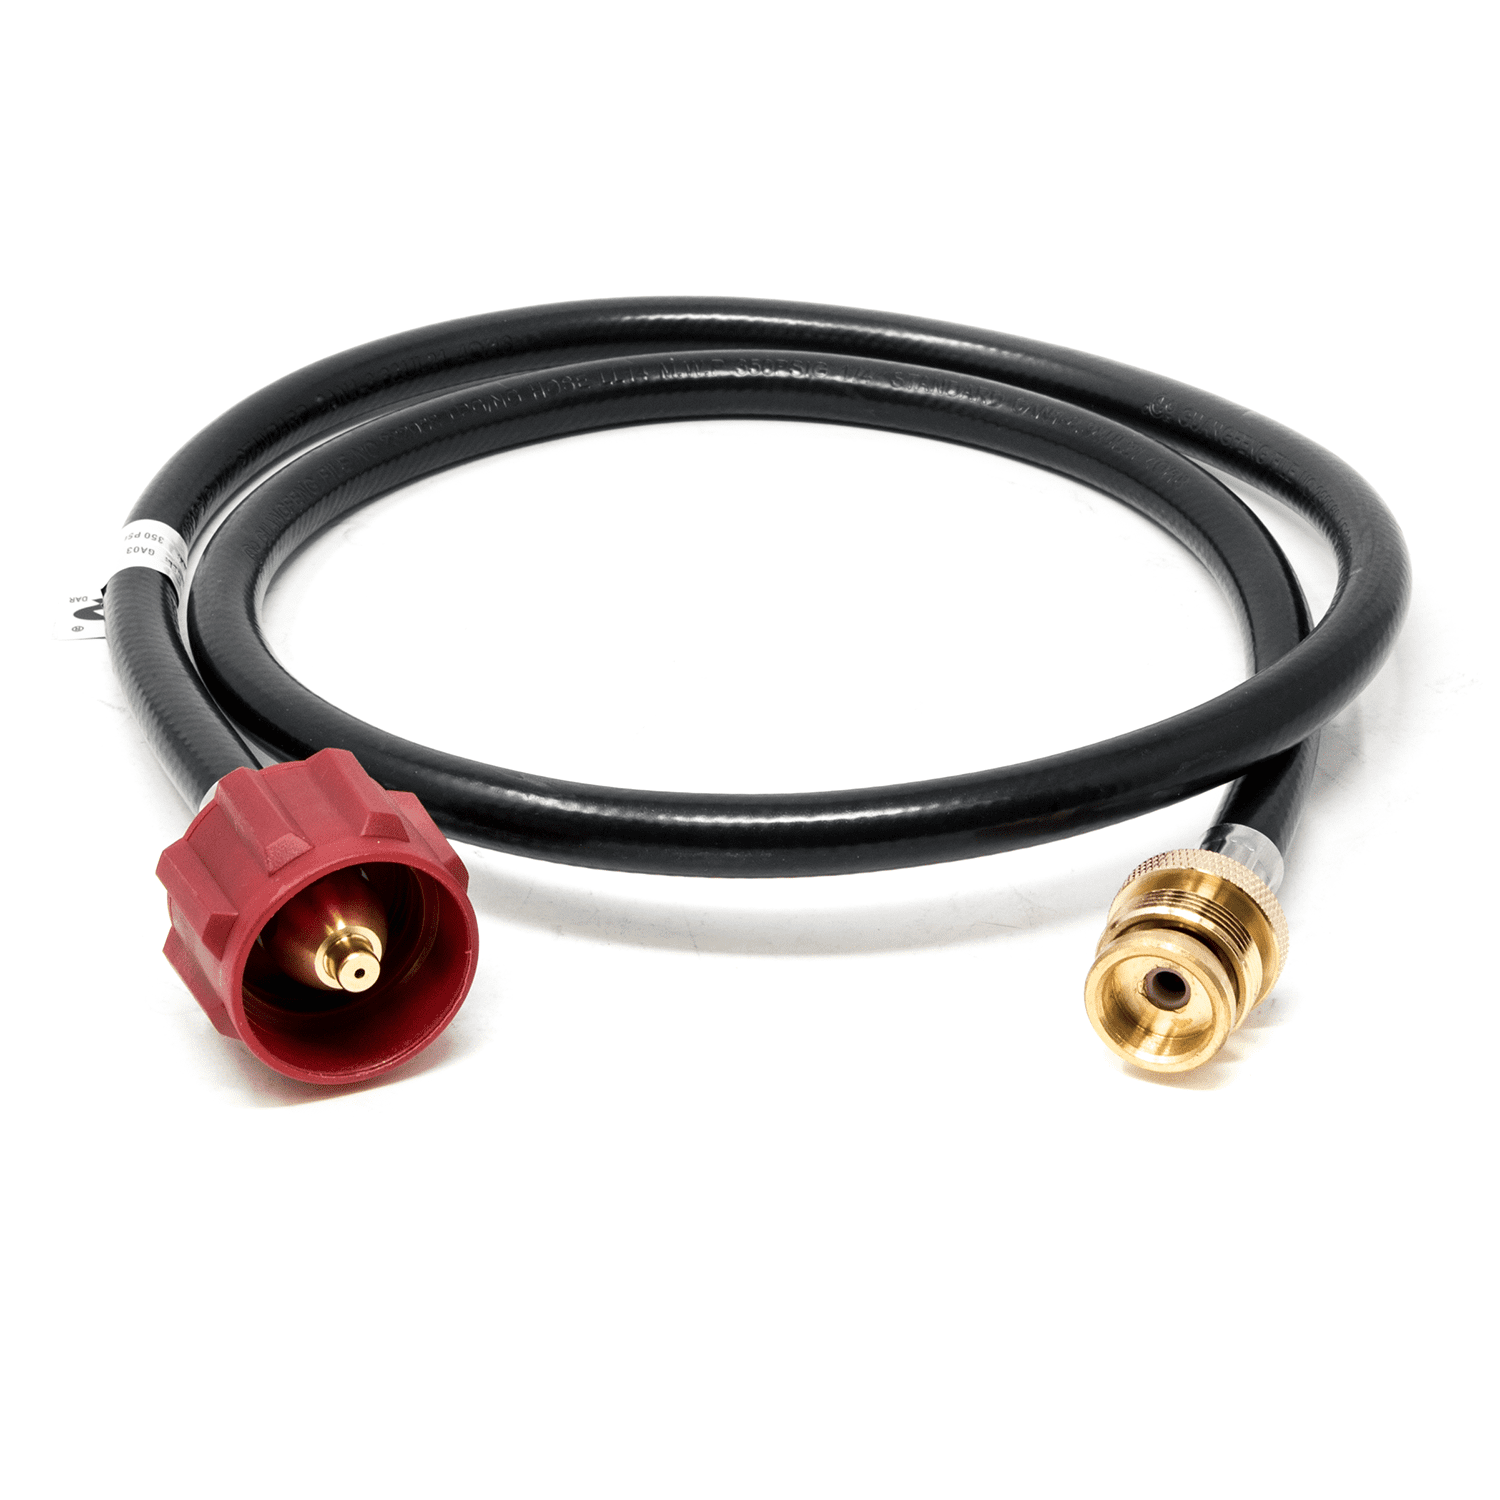 4 Feet Propane Adapter Hose 1 Lb to 20 Lb Converter with Stainless Steel Col V3 